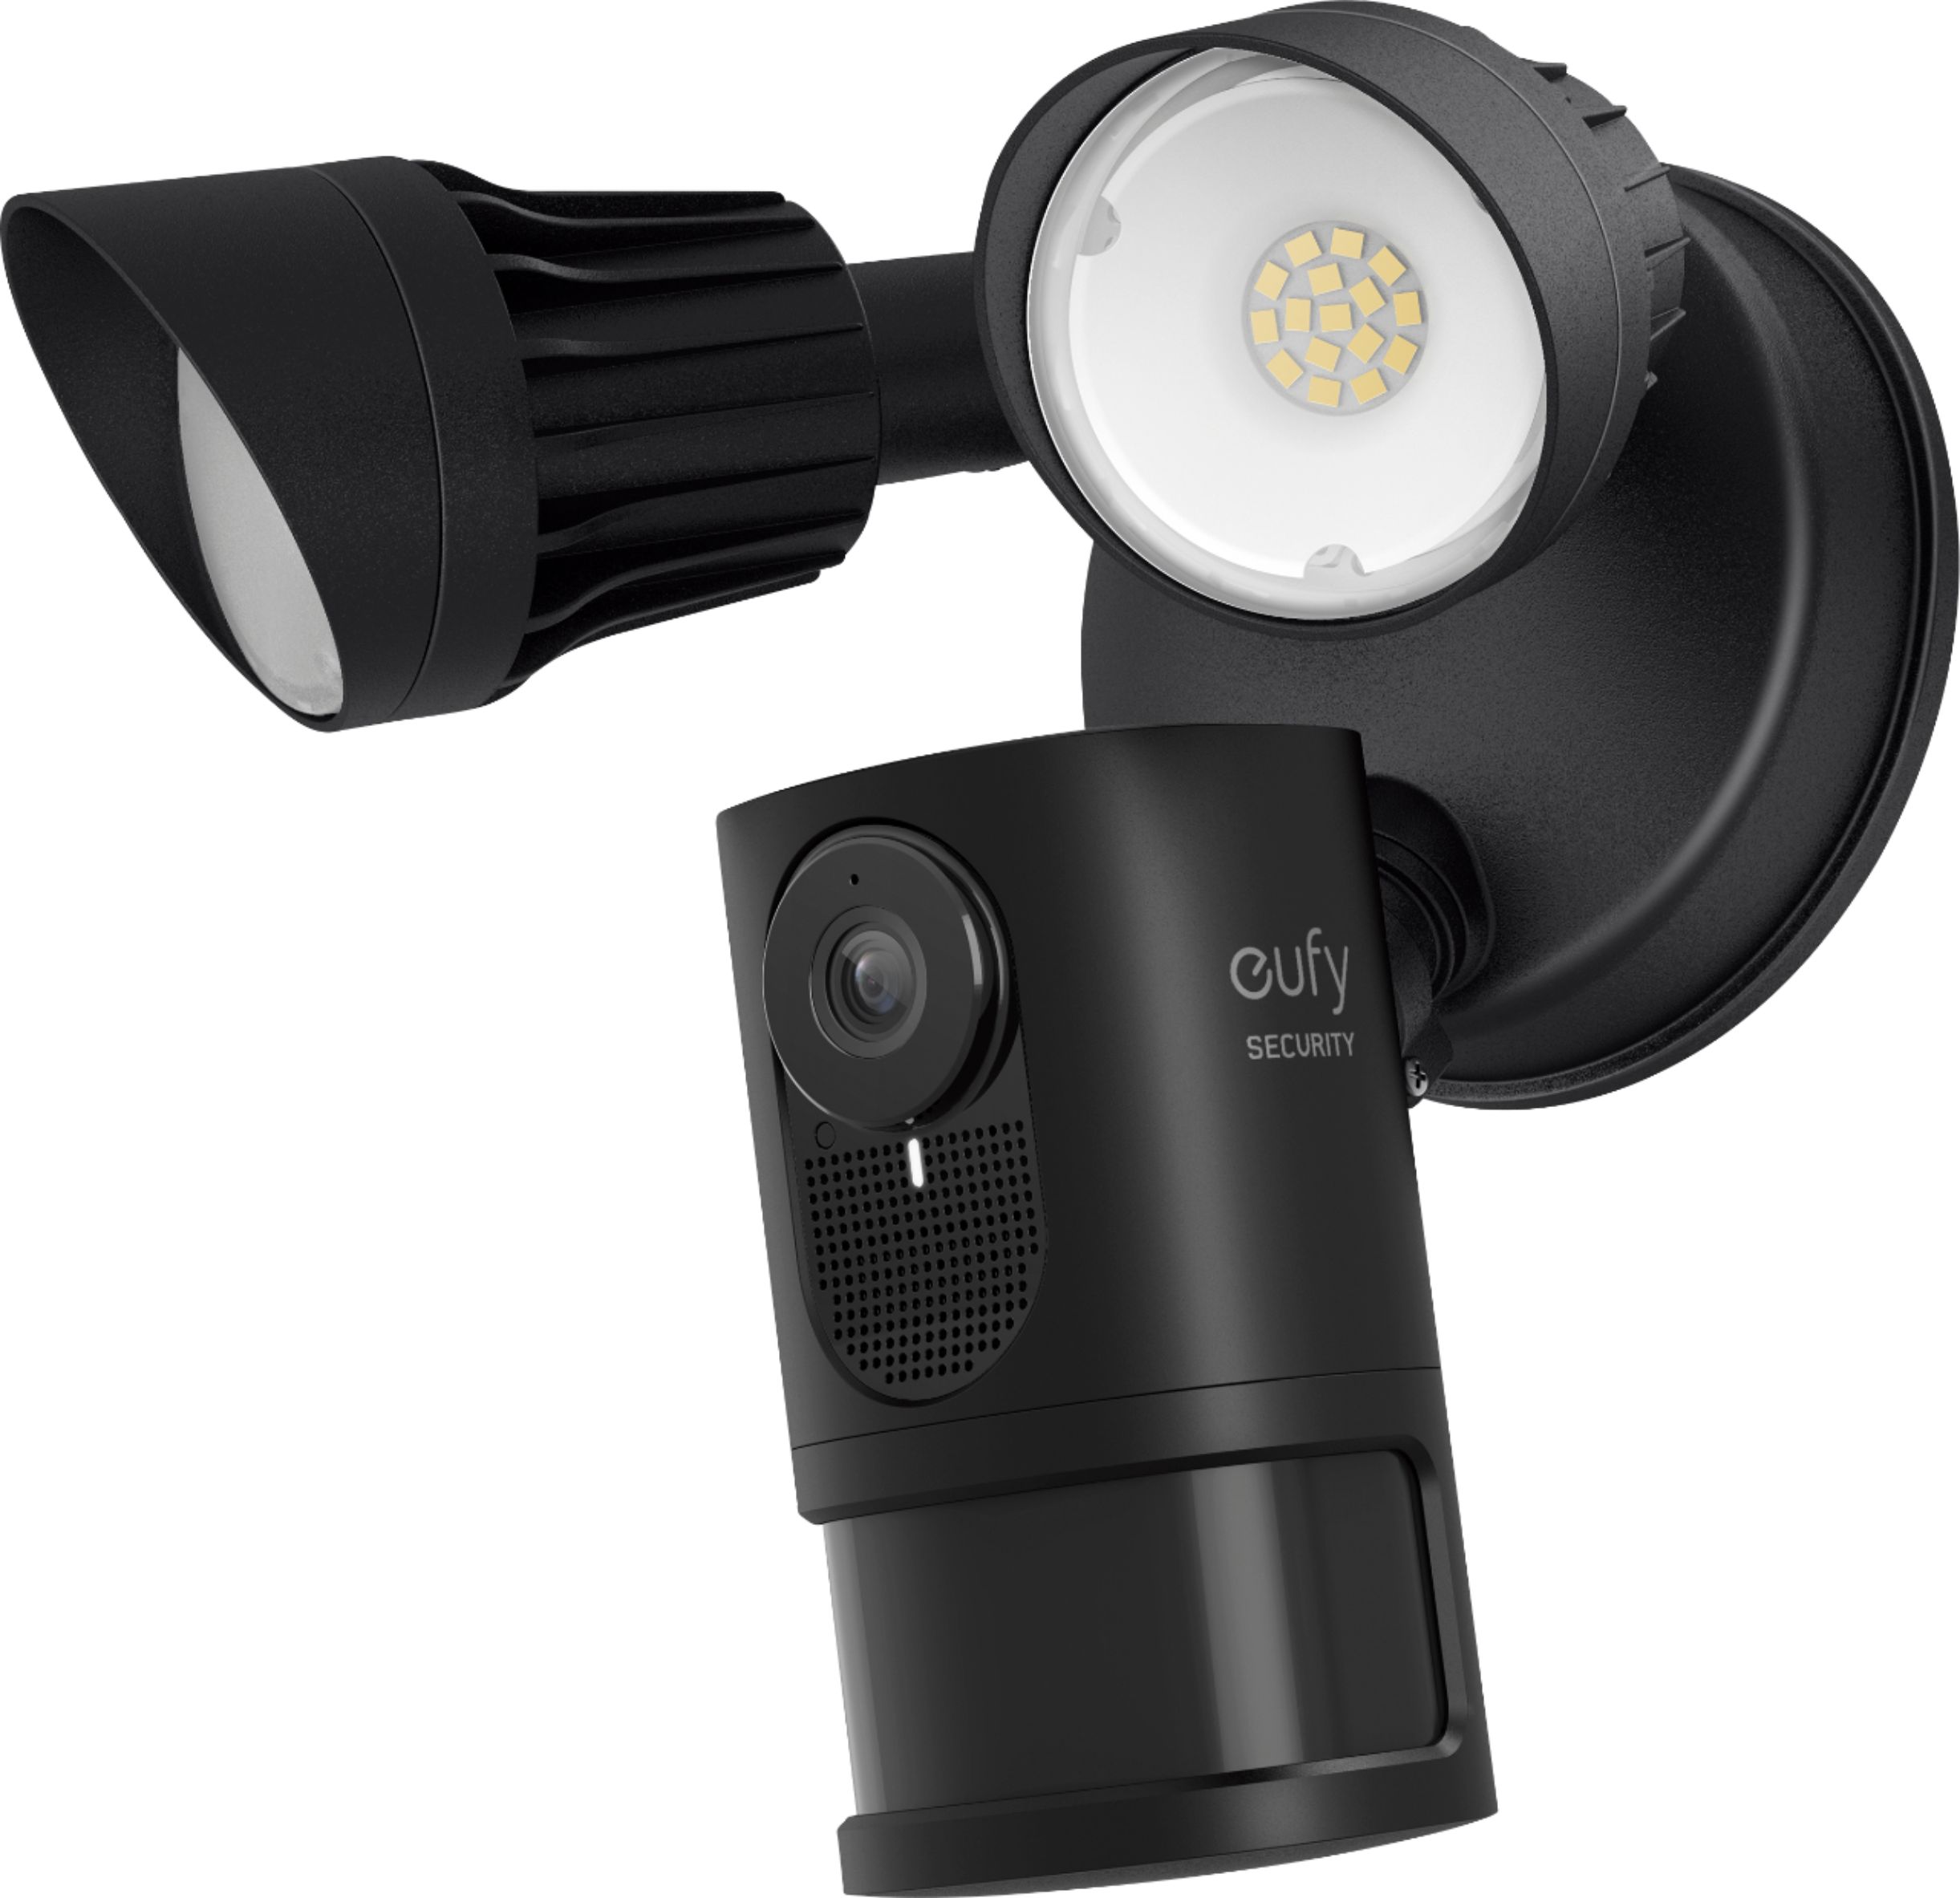 eufy Security Floodlight Cam 2k Black - deal of the day - $159.99